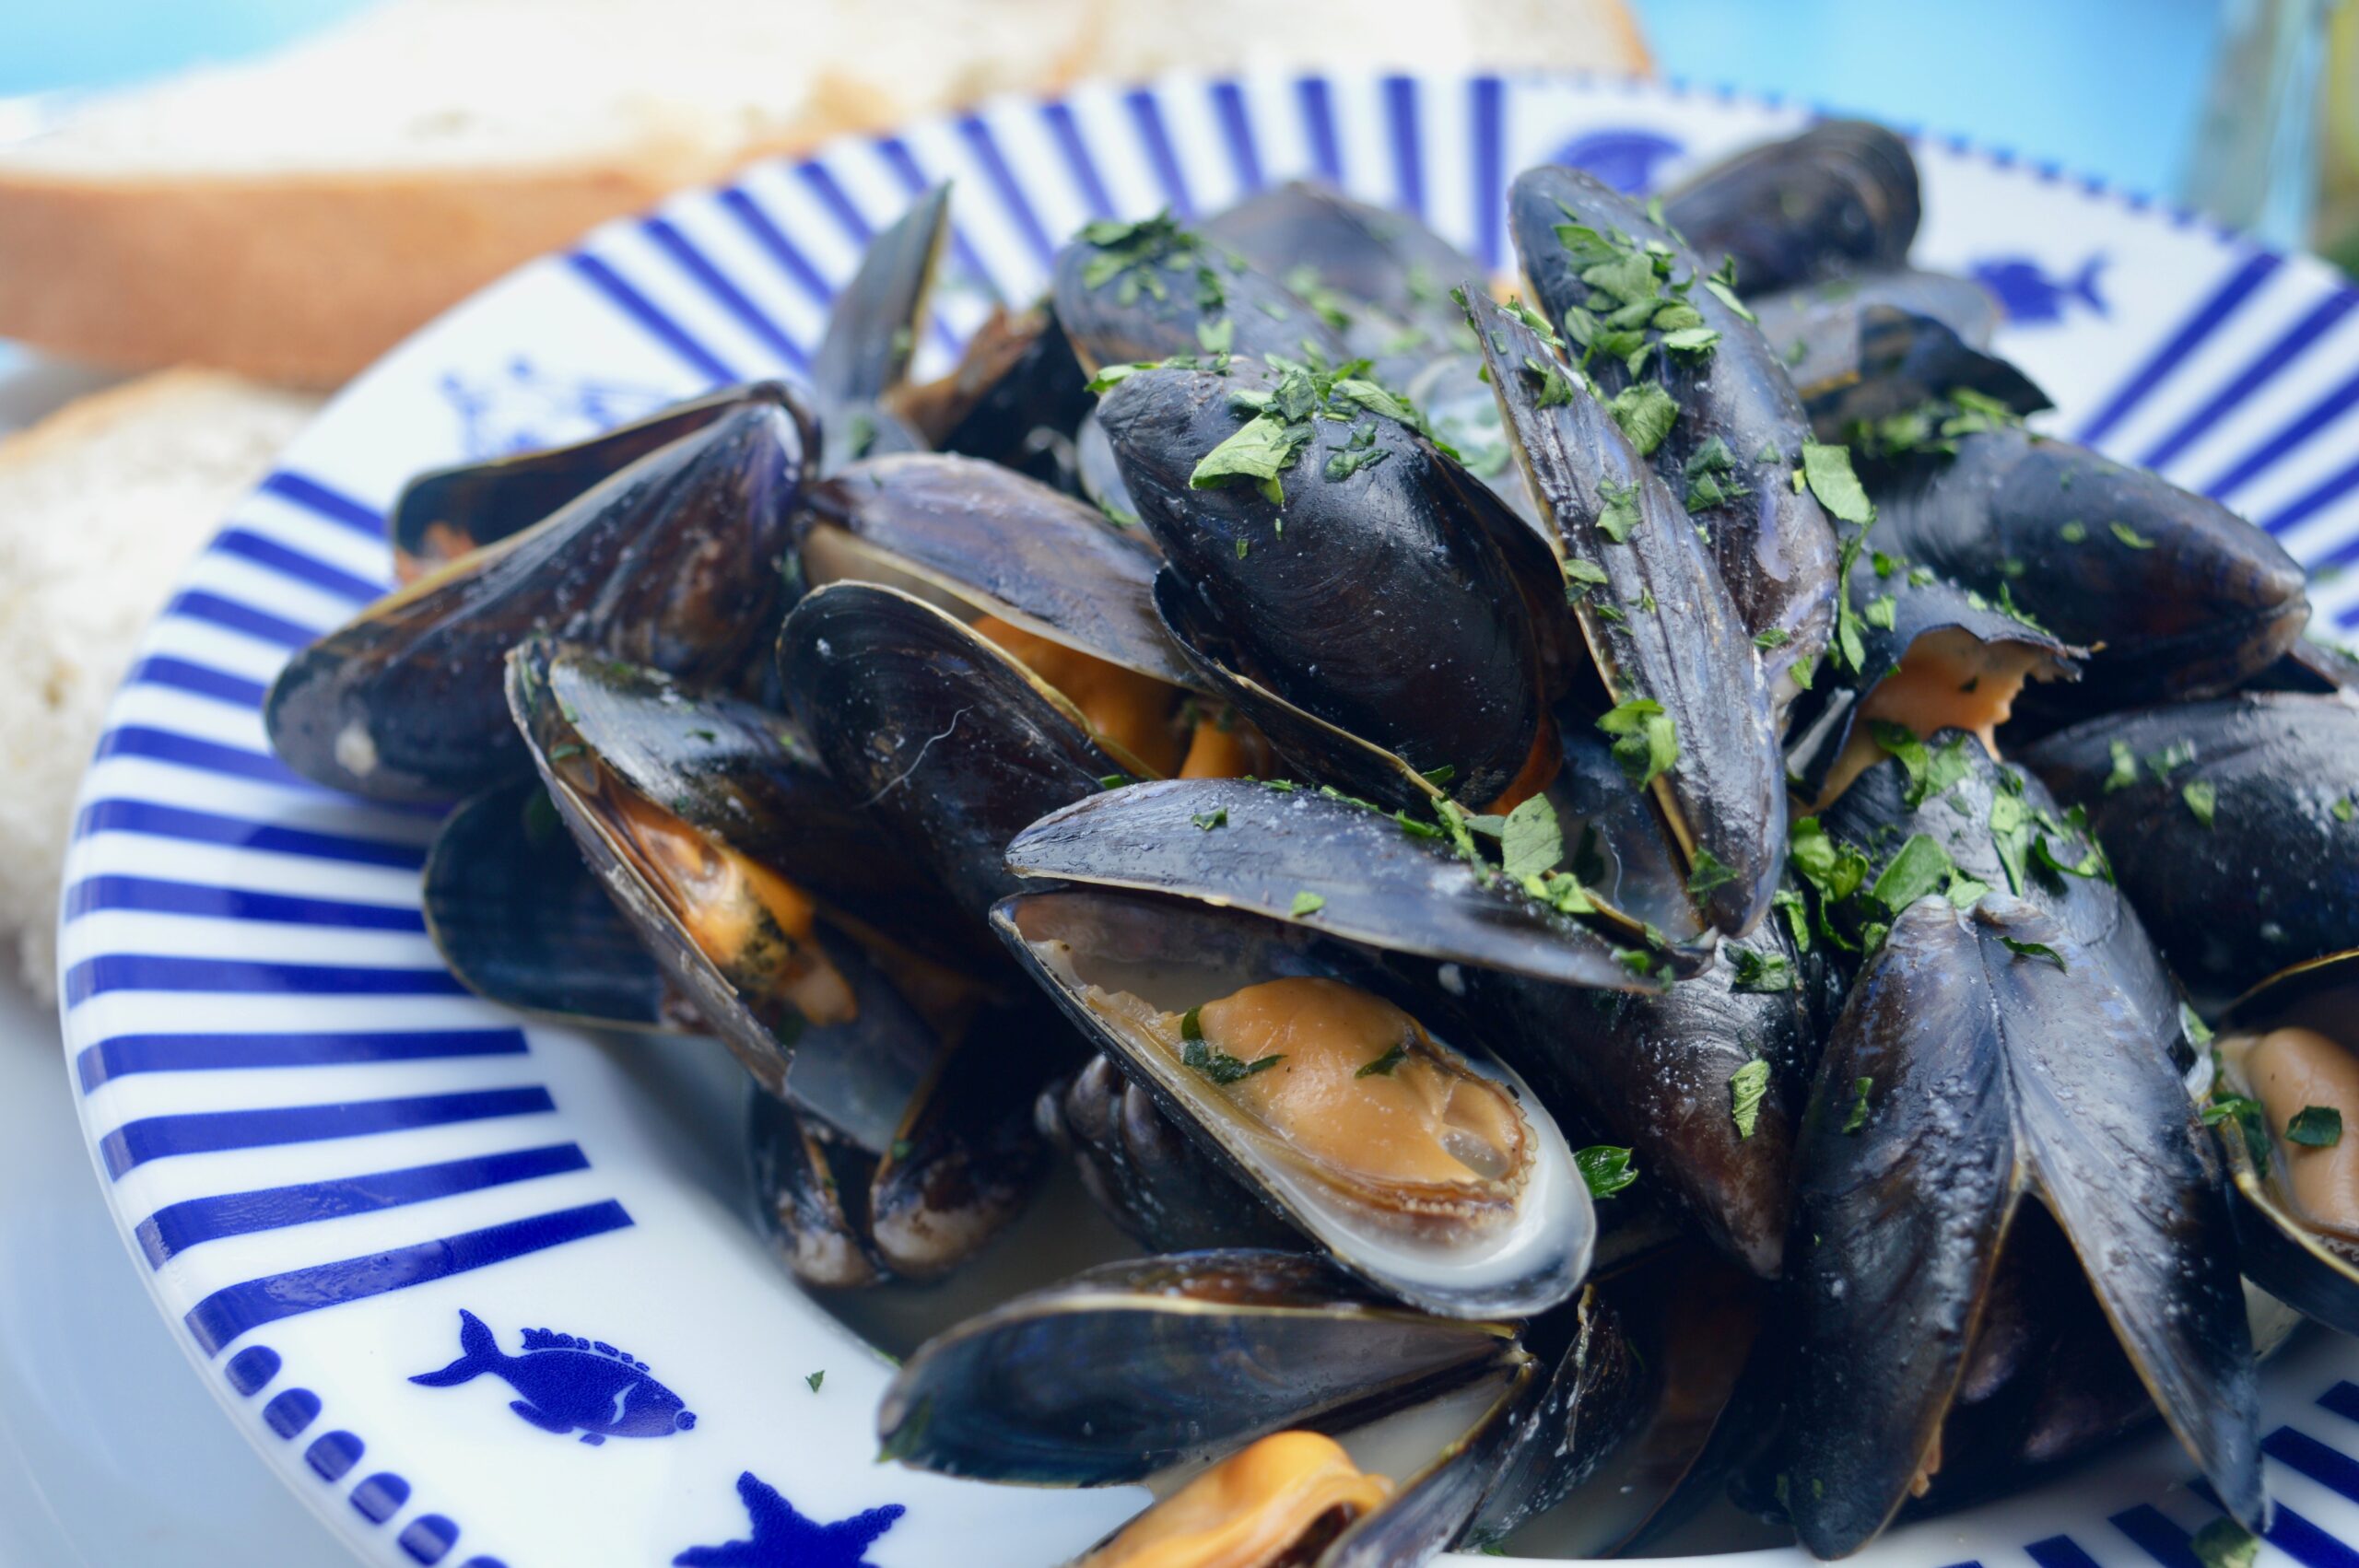 Mussels-Crab-Waltzer-Review-Whitley-Bay-Seaside-Cafe-Elle-Blonde-Luxury-Lifestyle-Destination